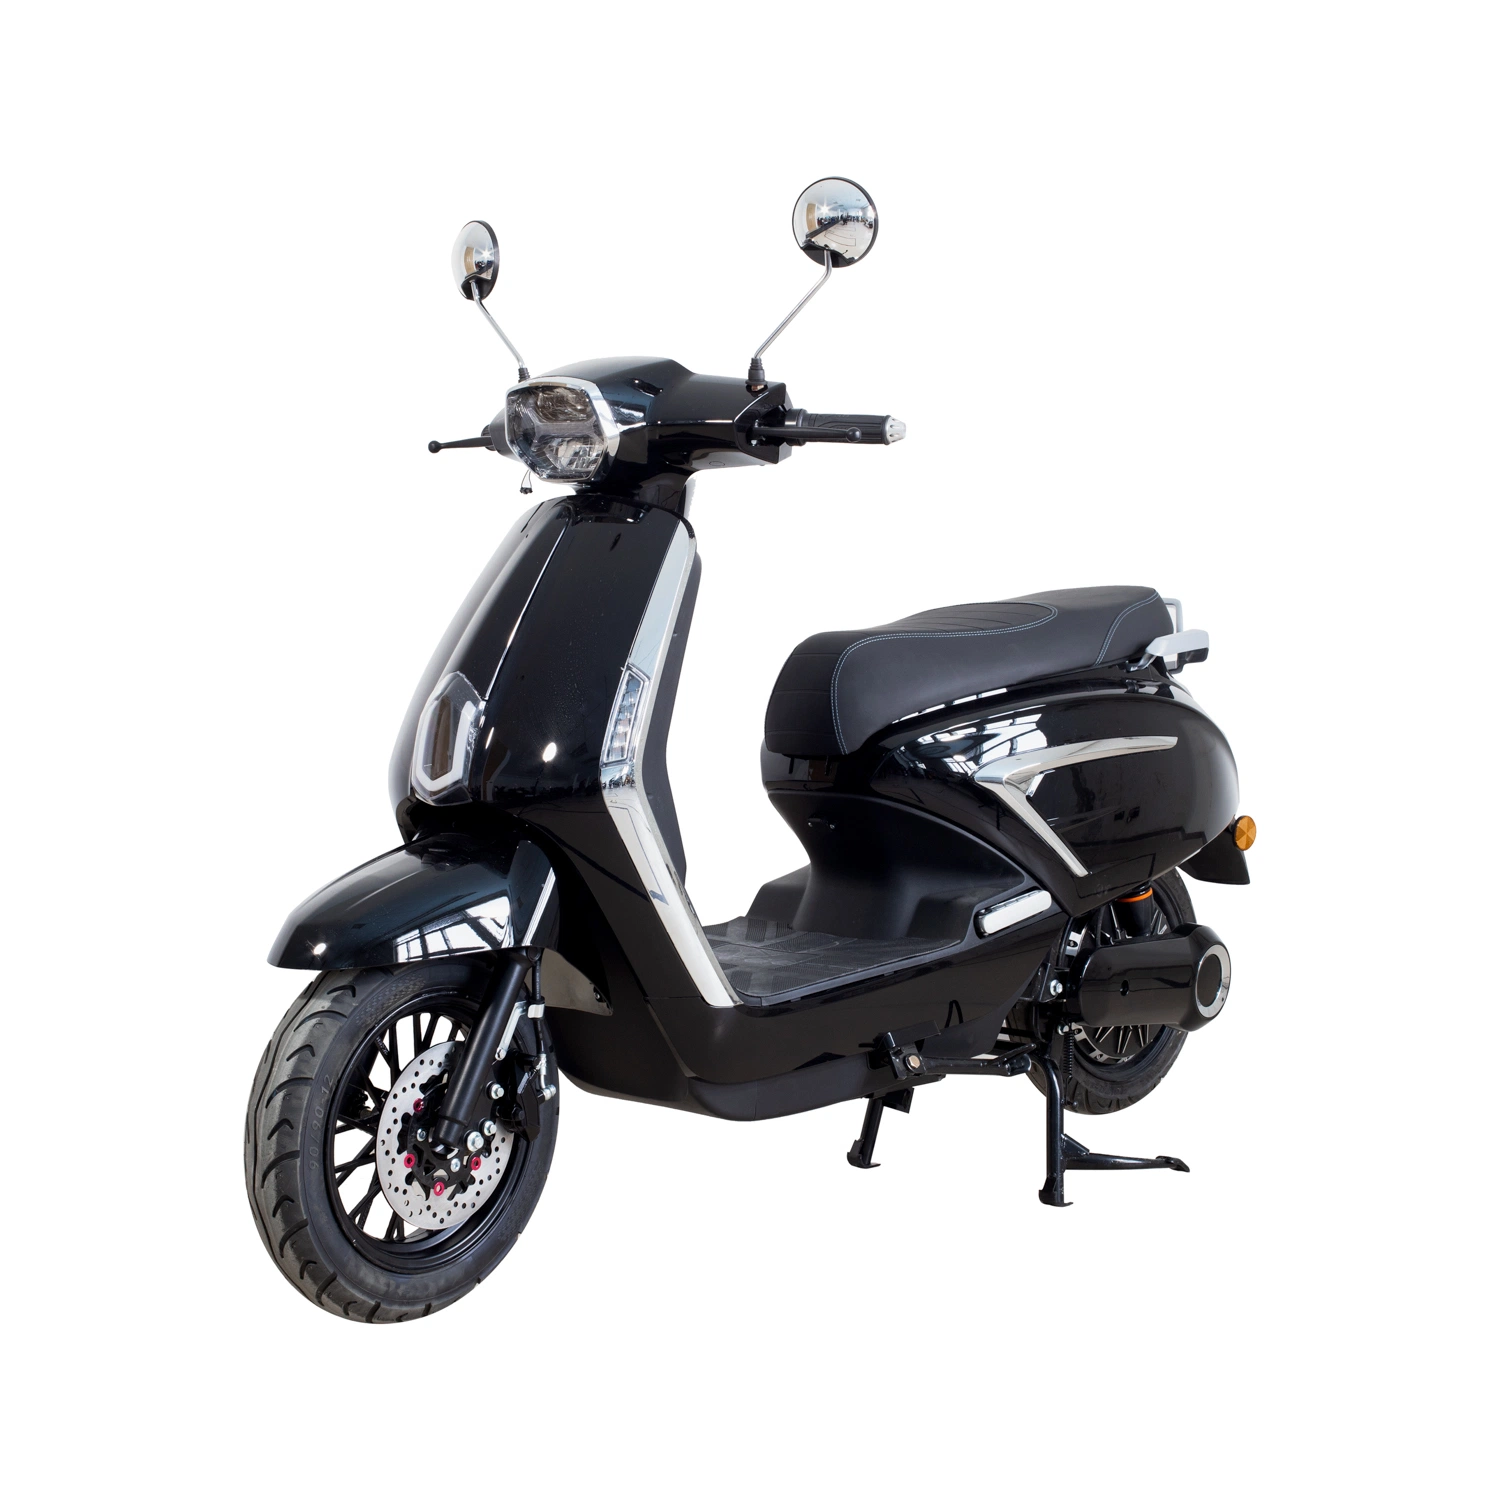 Hot-Selling 2 Wheel Electric Scooter Made in China 1000W 48V 60V Adult Electric Motorcycle Disc Brake for Sale